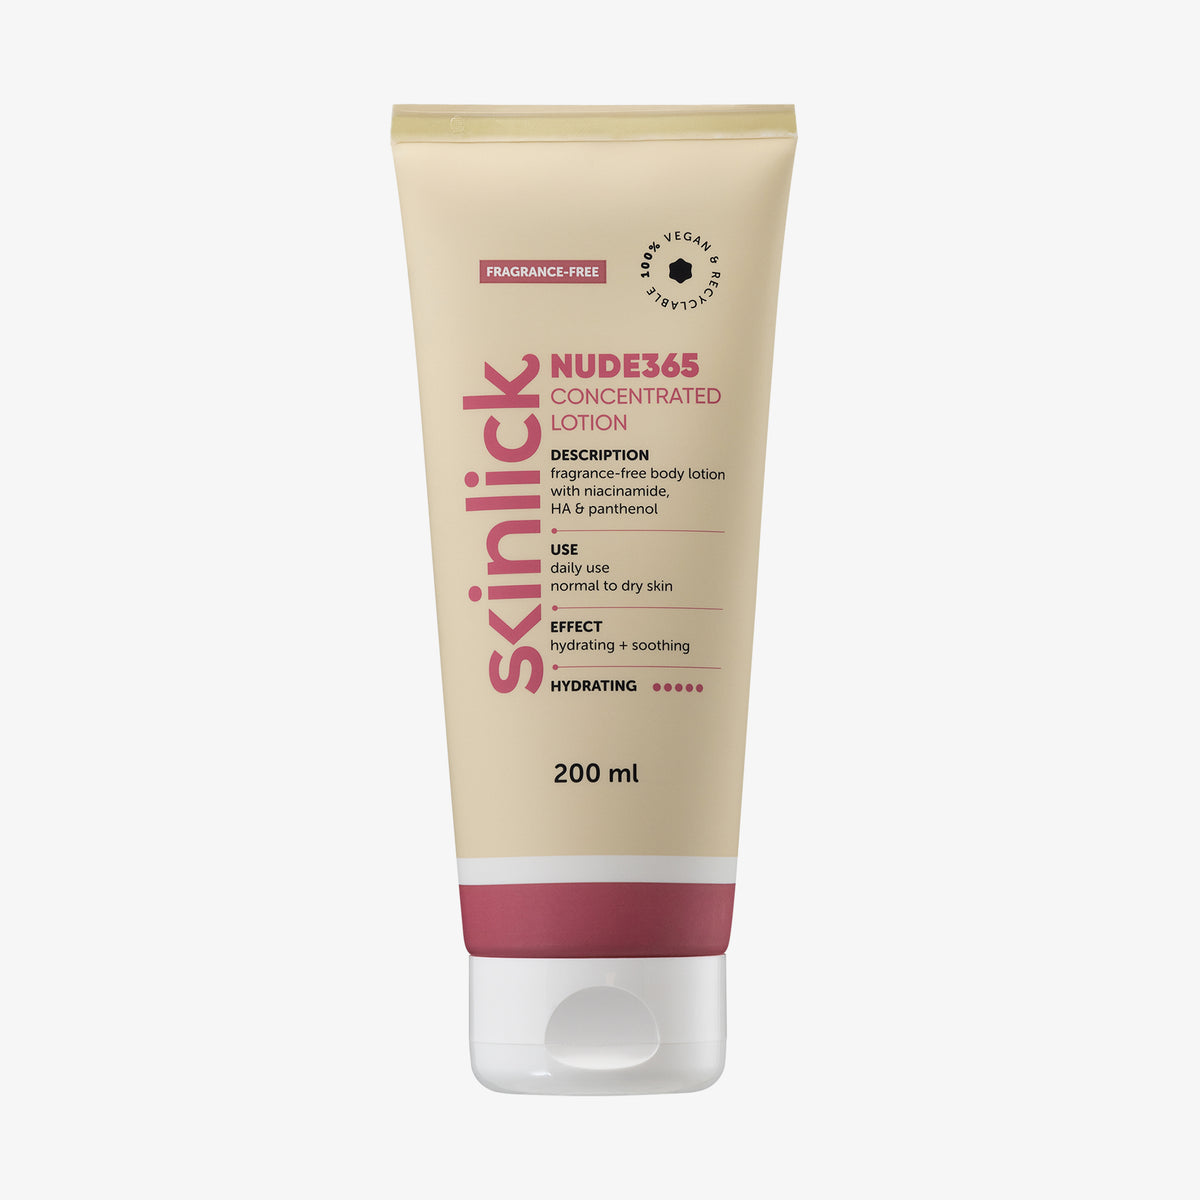 skinlick | Nude365 Concentrated Lotion